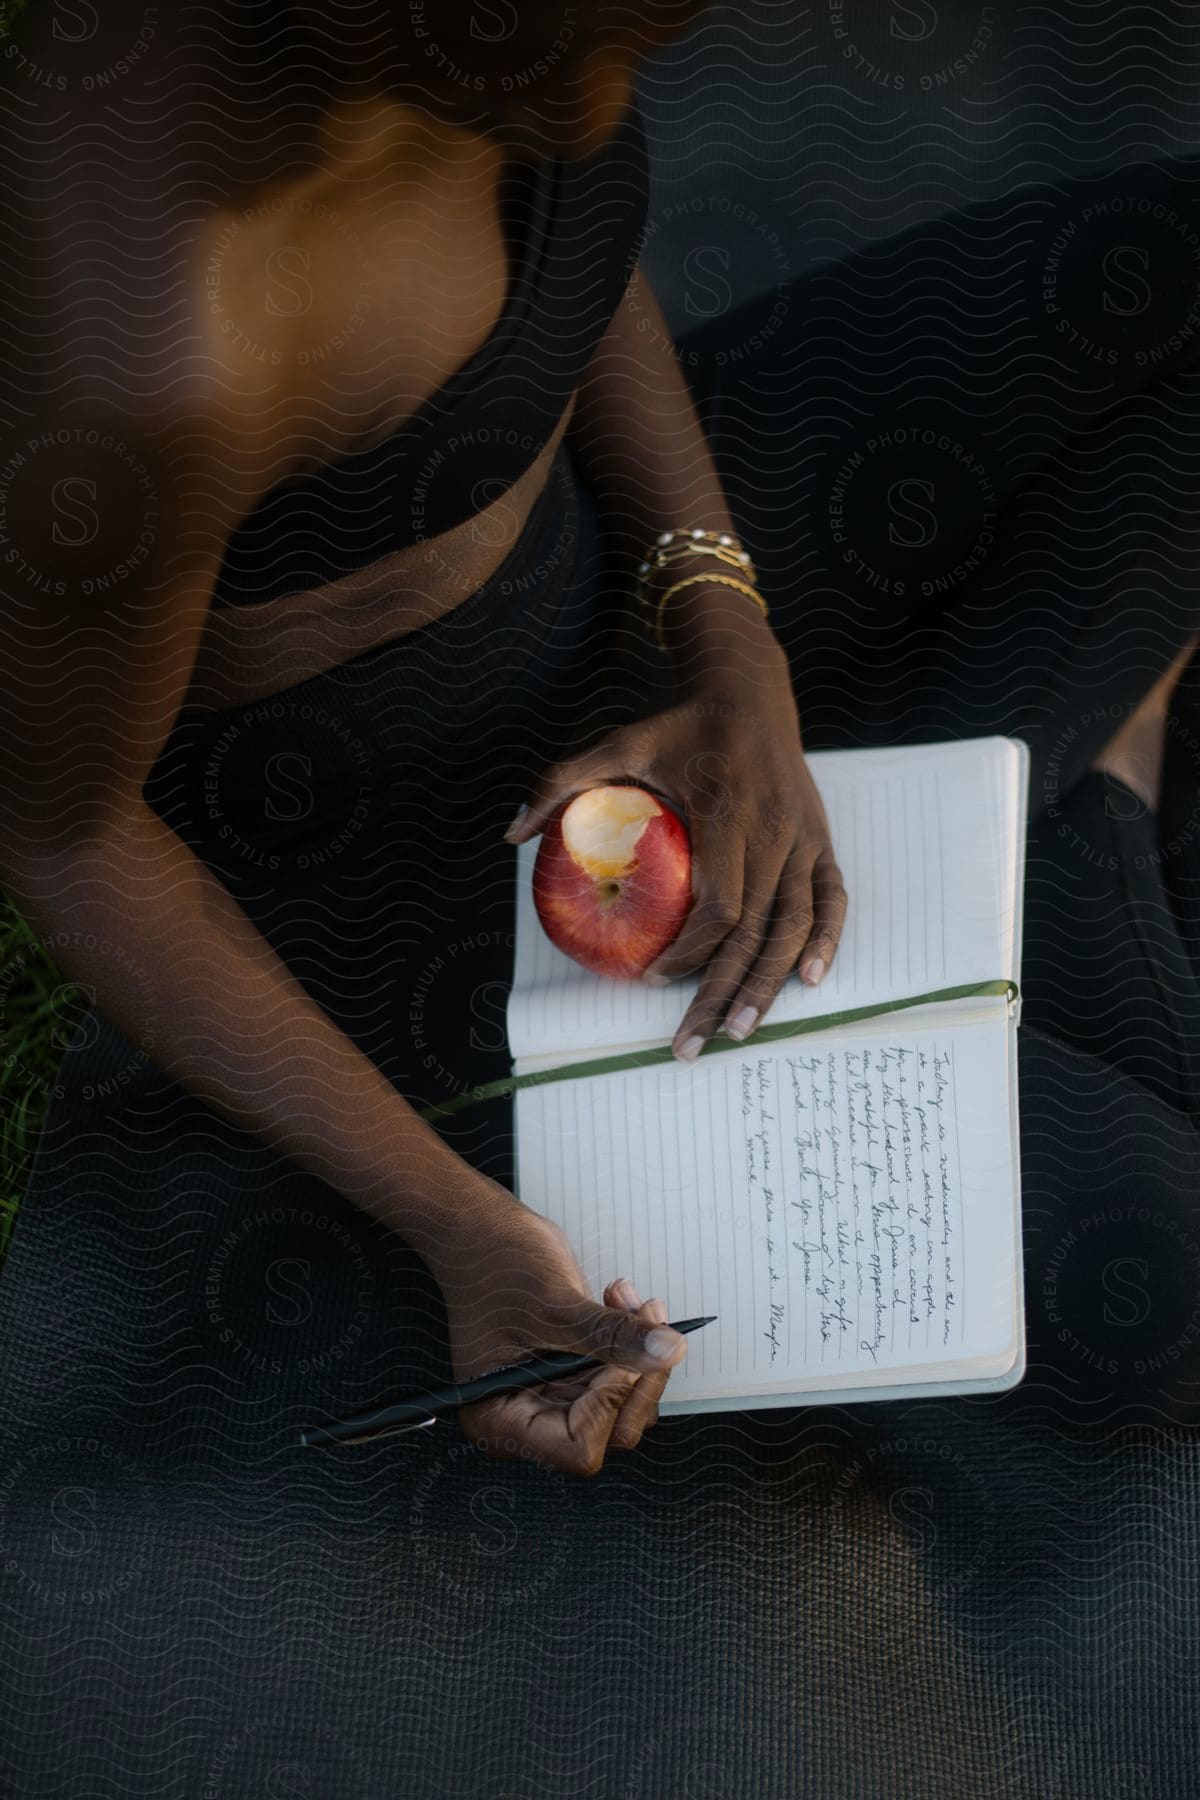 A woman sits while writing in a lined notebook while holding an apple with a bite taken out of it.